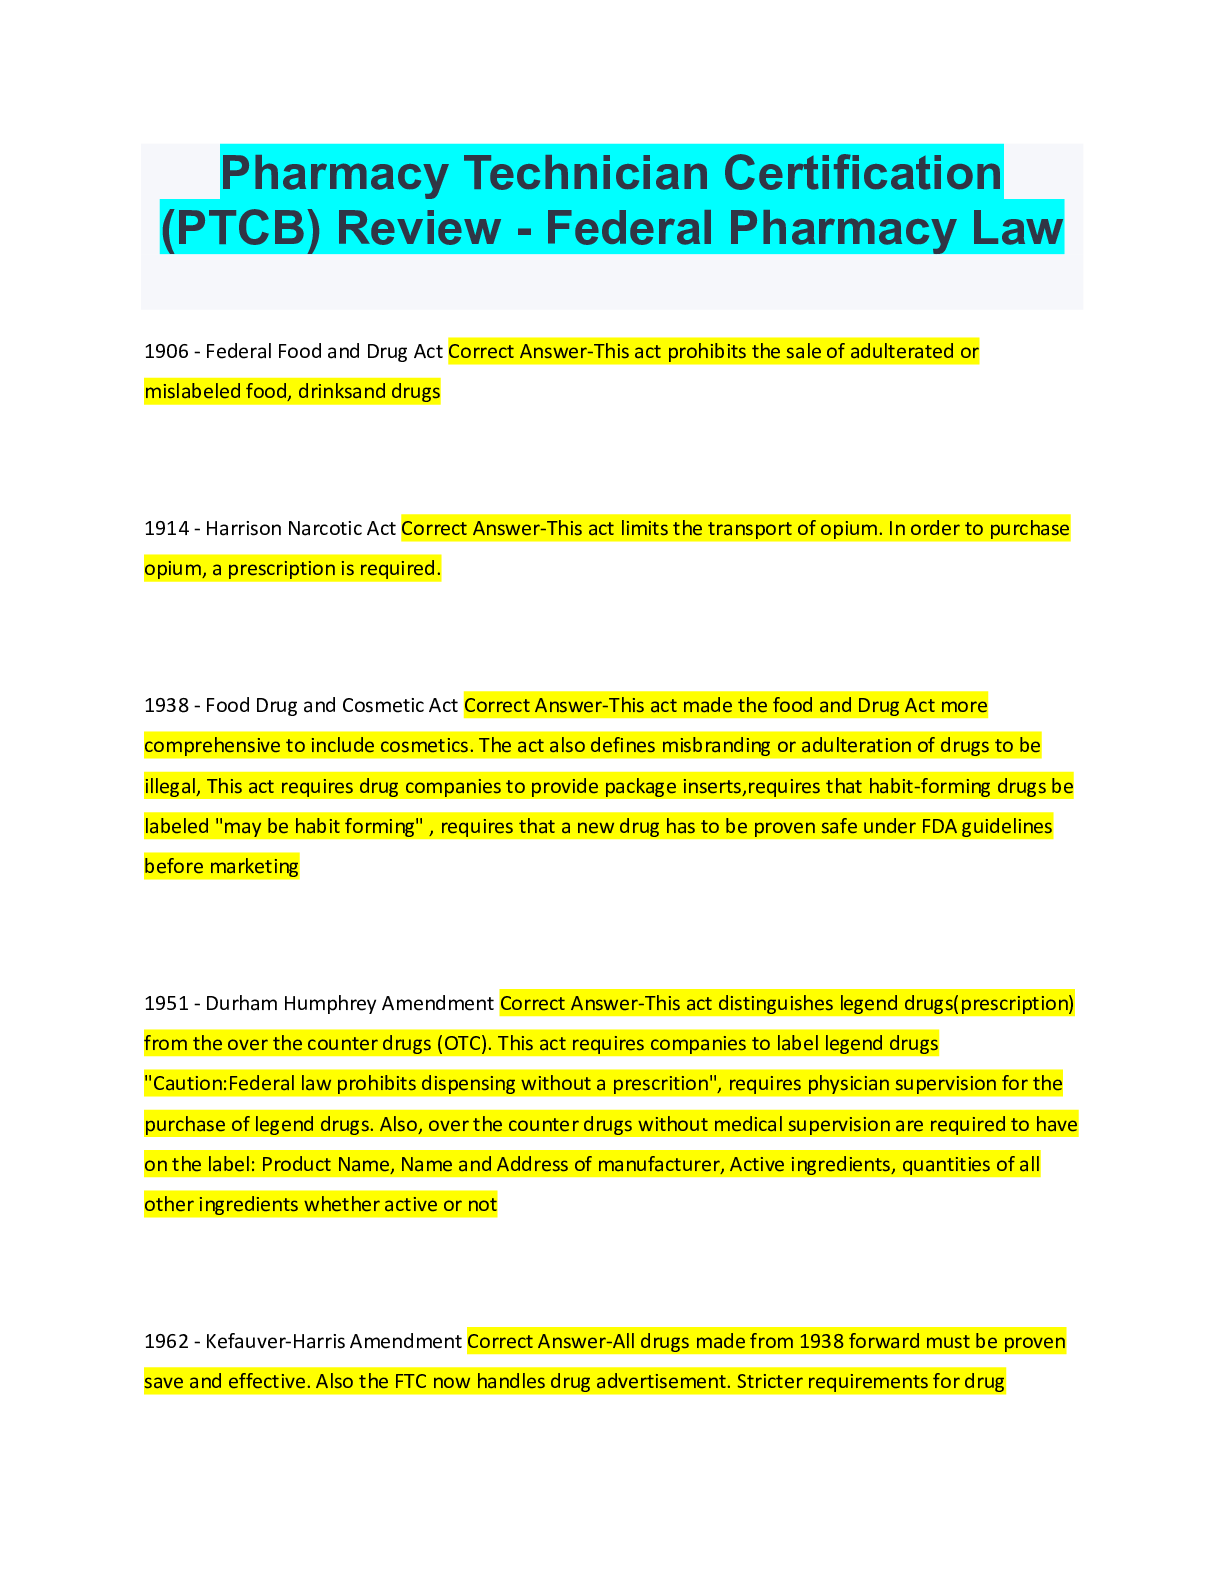 Pharmacy Technician Certification (PTCB) Review Federal Pharmacy Law